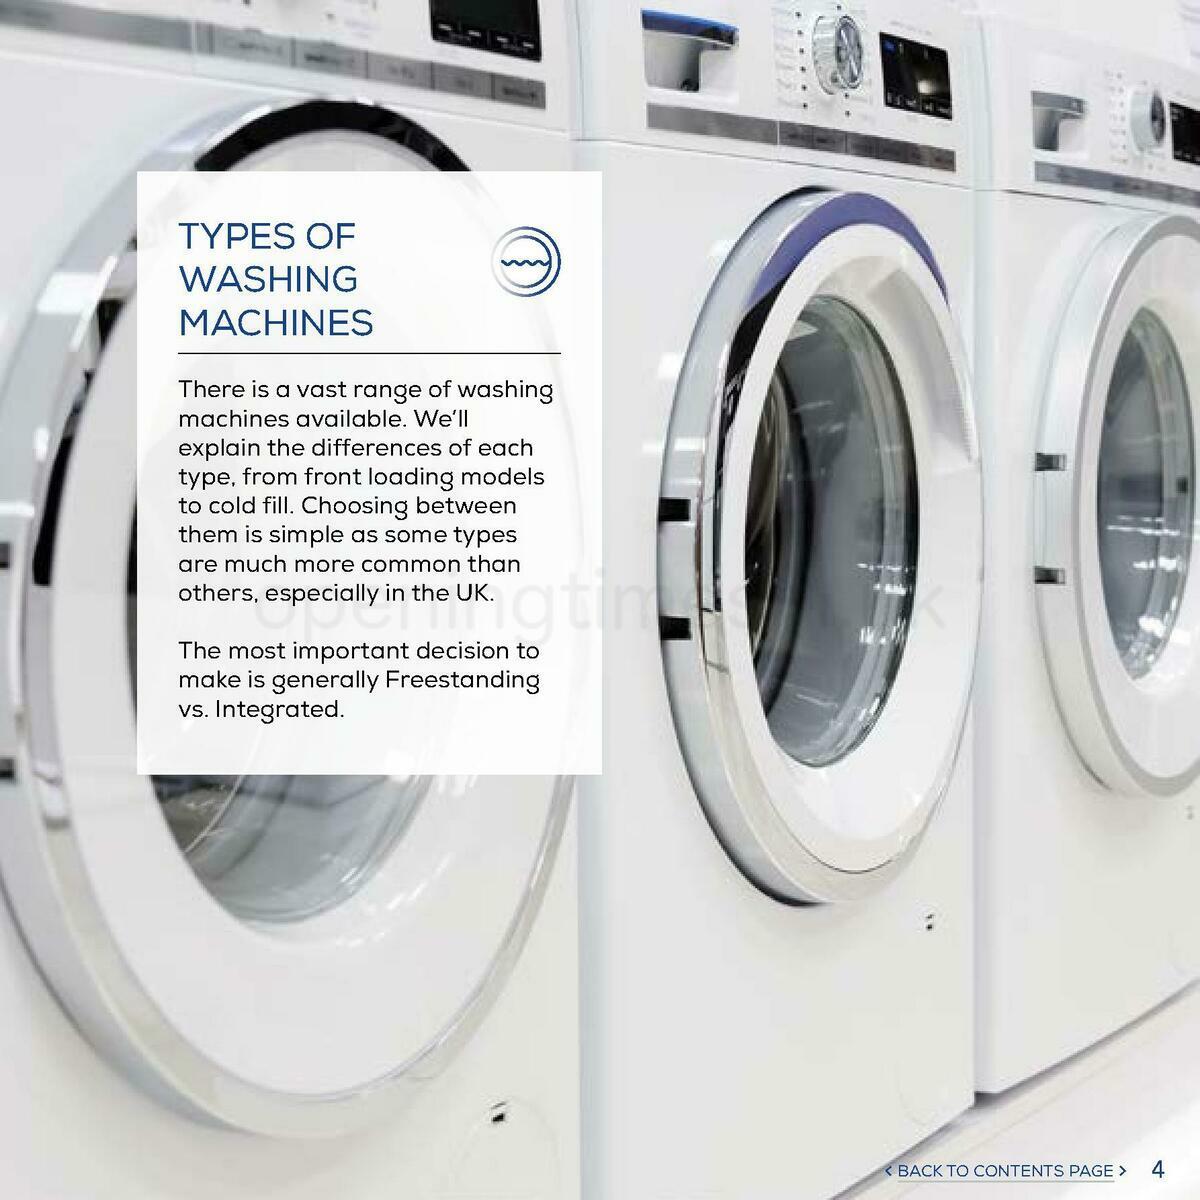 Euronics Washing Machines Buyers Guide Offers from 1 January